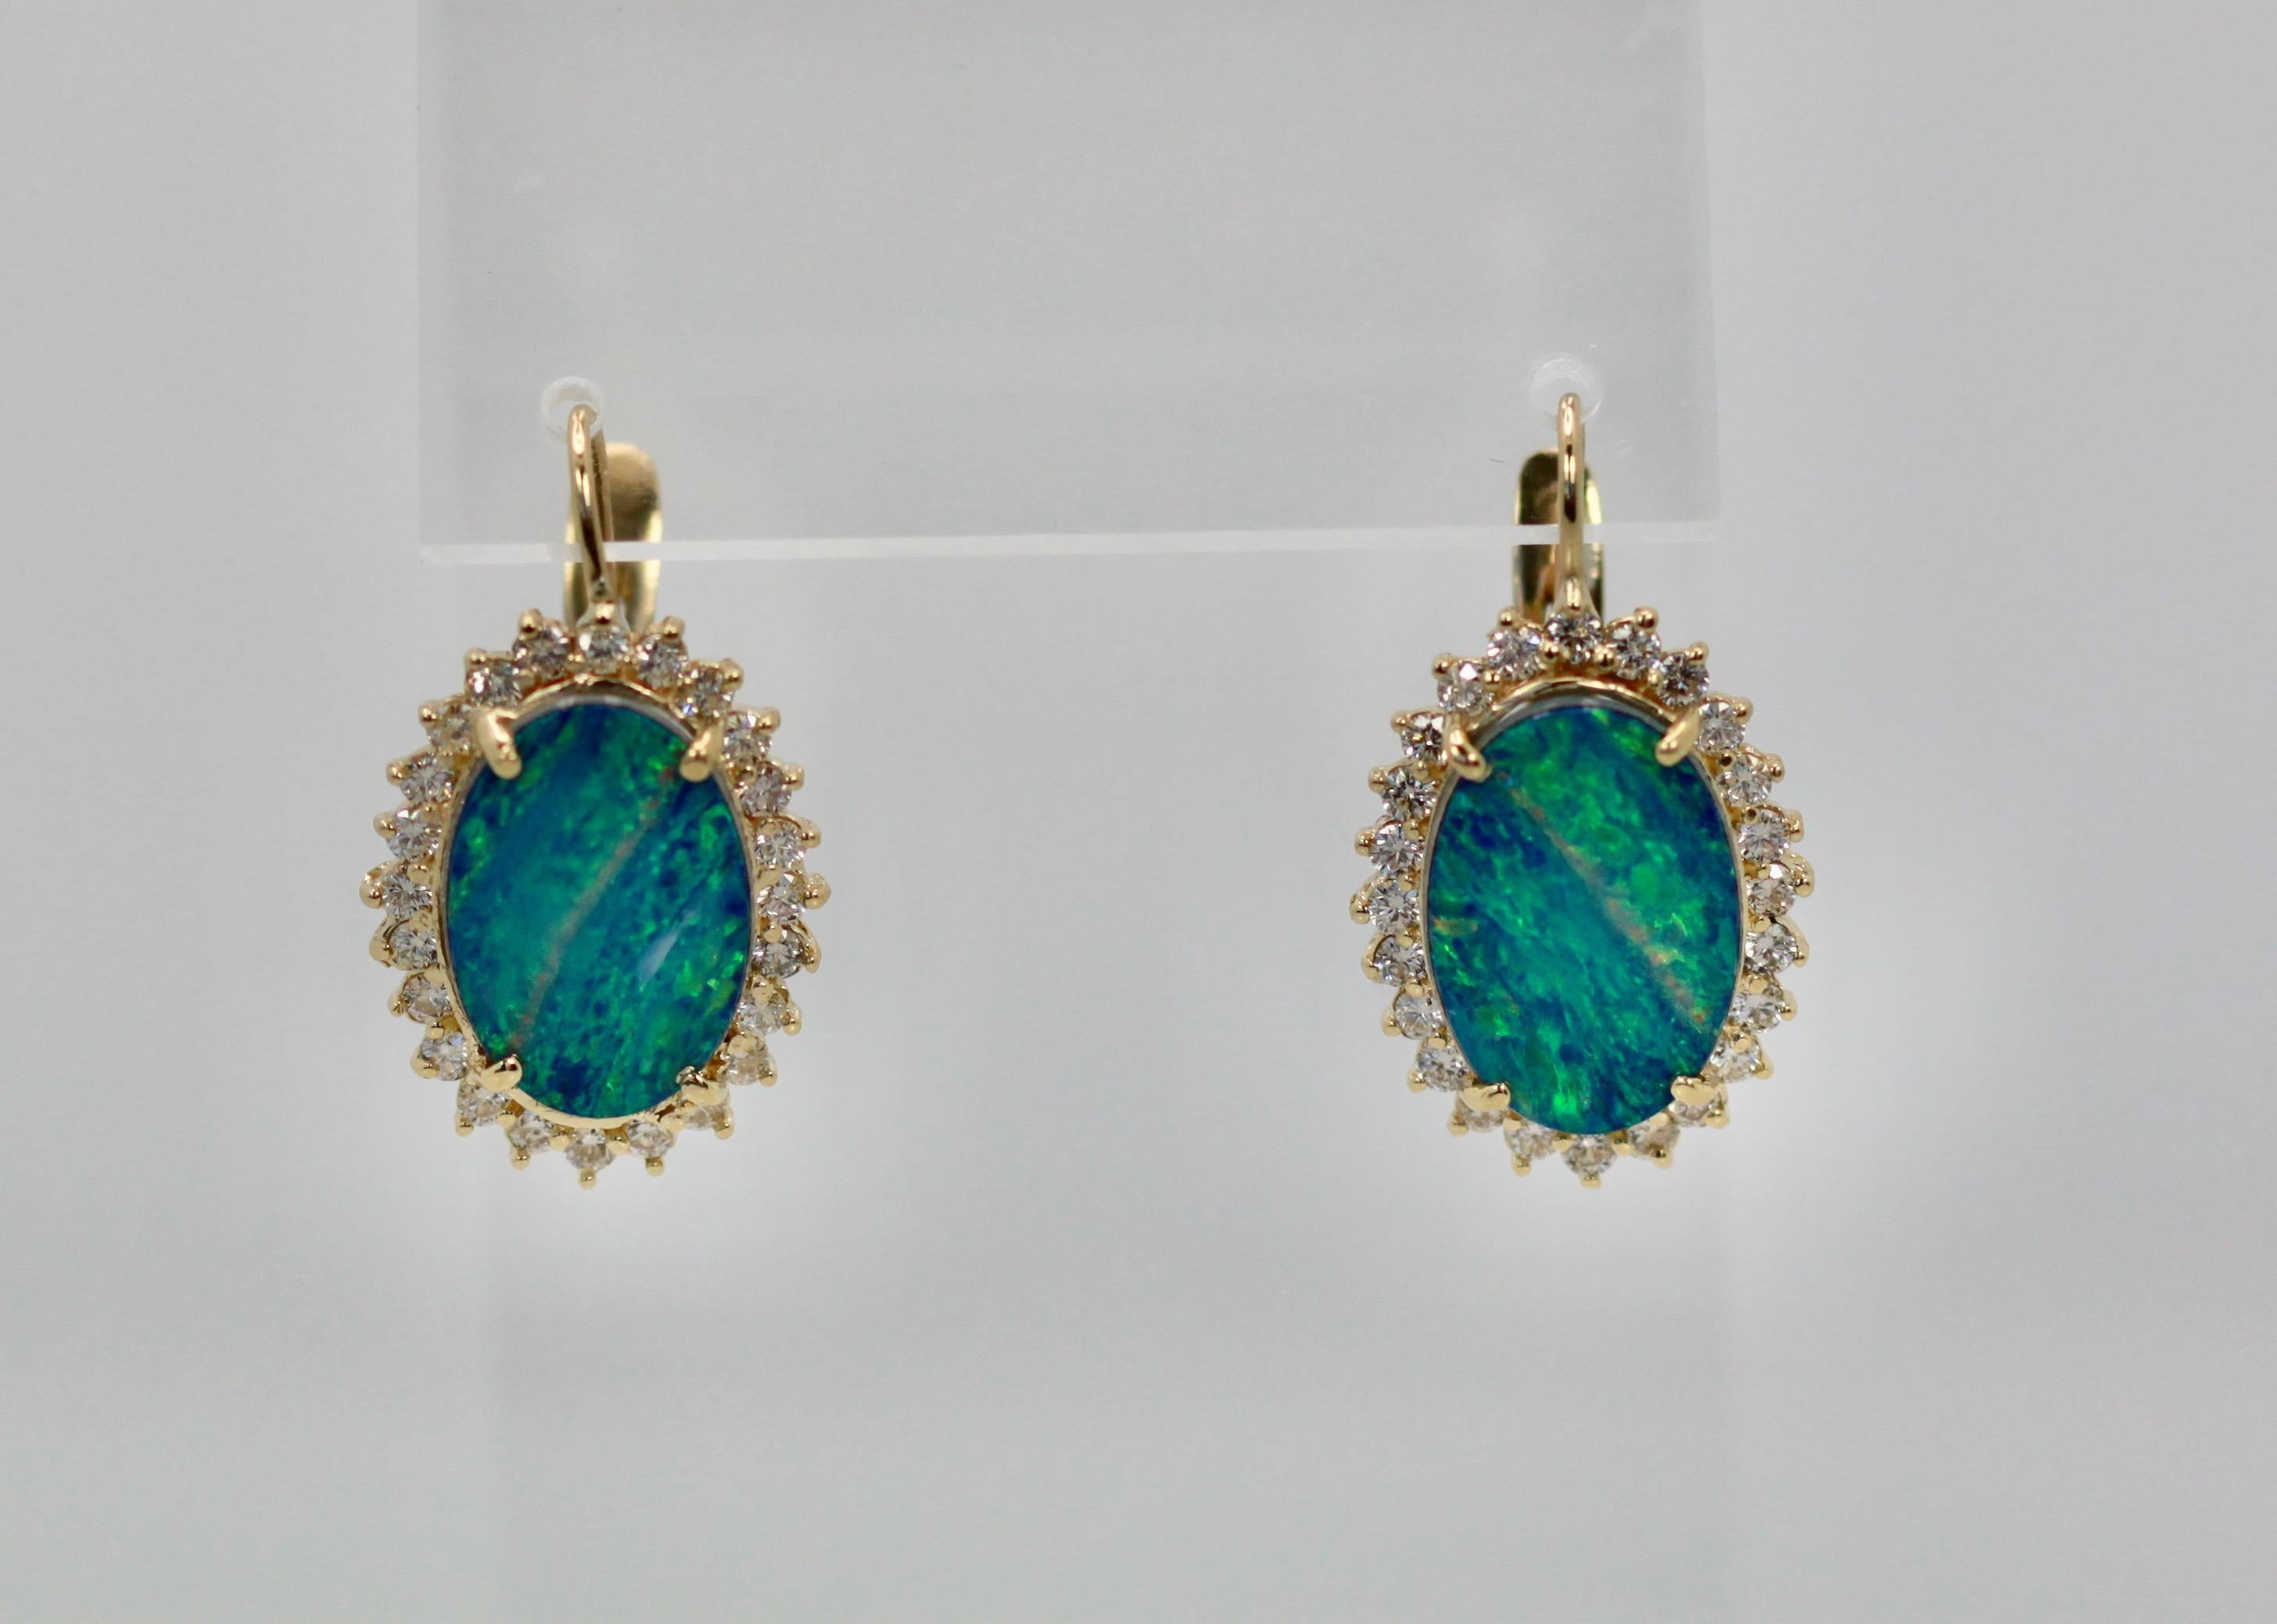 These Black Opal earrings are oval with a diamond surround.  The Opals are 18.54mm x 13.08mm, these are Opal doublets. Set in a surround of Diamonds they measure 23.26mm x 17.51mm.  These weight 10.2 grams there are 1.88 Carats of Diamonds the Opals